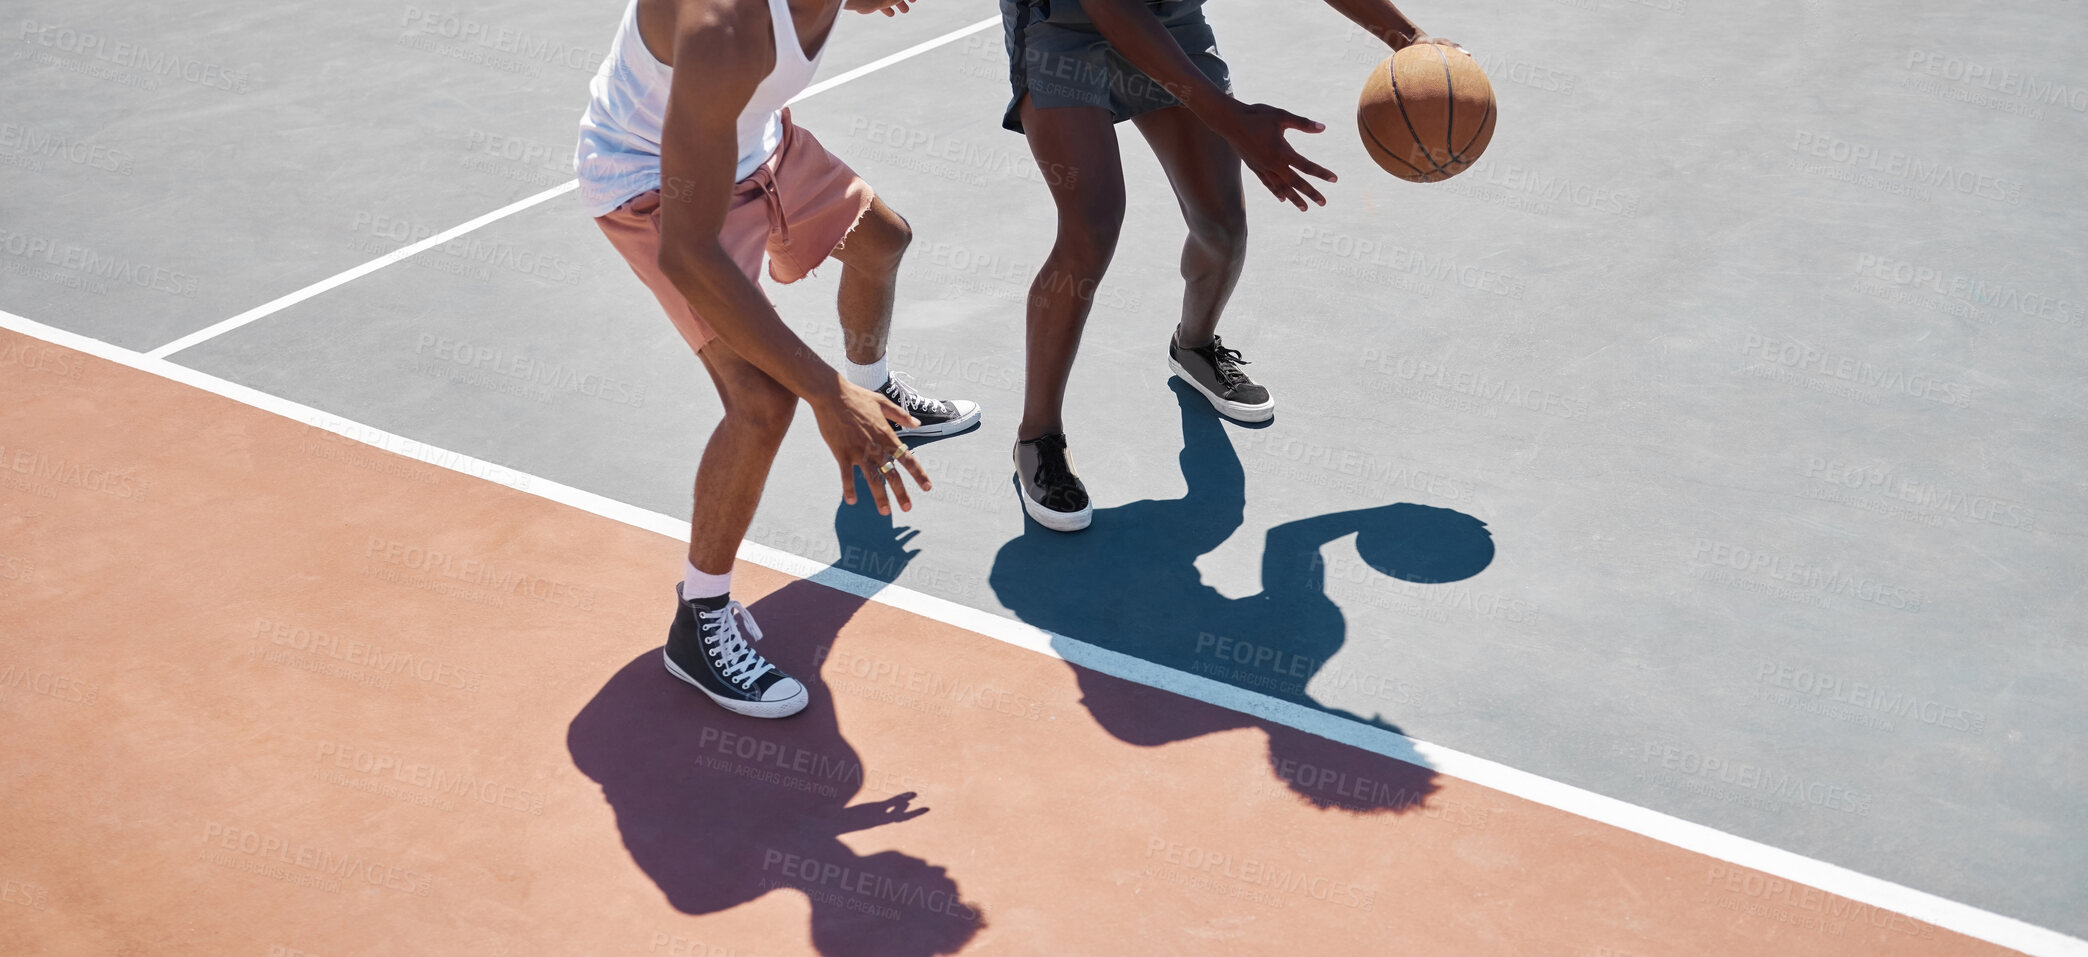 Buy stock photo Sports, fitness and basketball training by men at basketball court for practice, exercise and stamina cardio. Sport, basketball player and friends playing competitive game outdoor, energy and workout